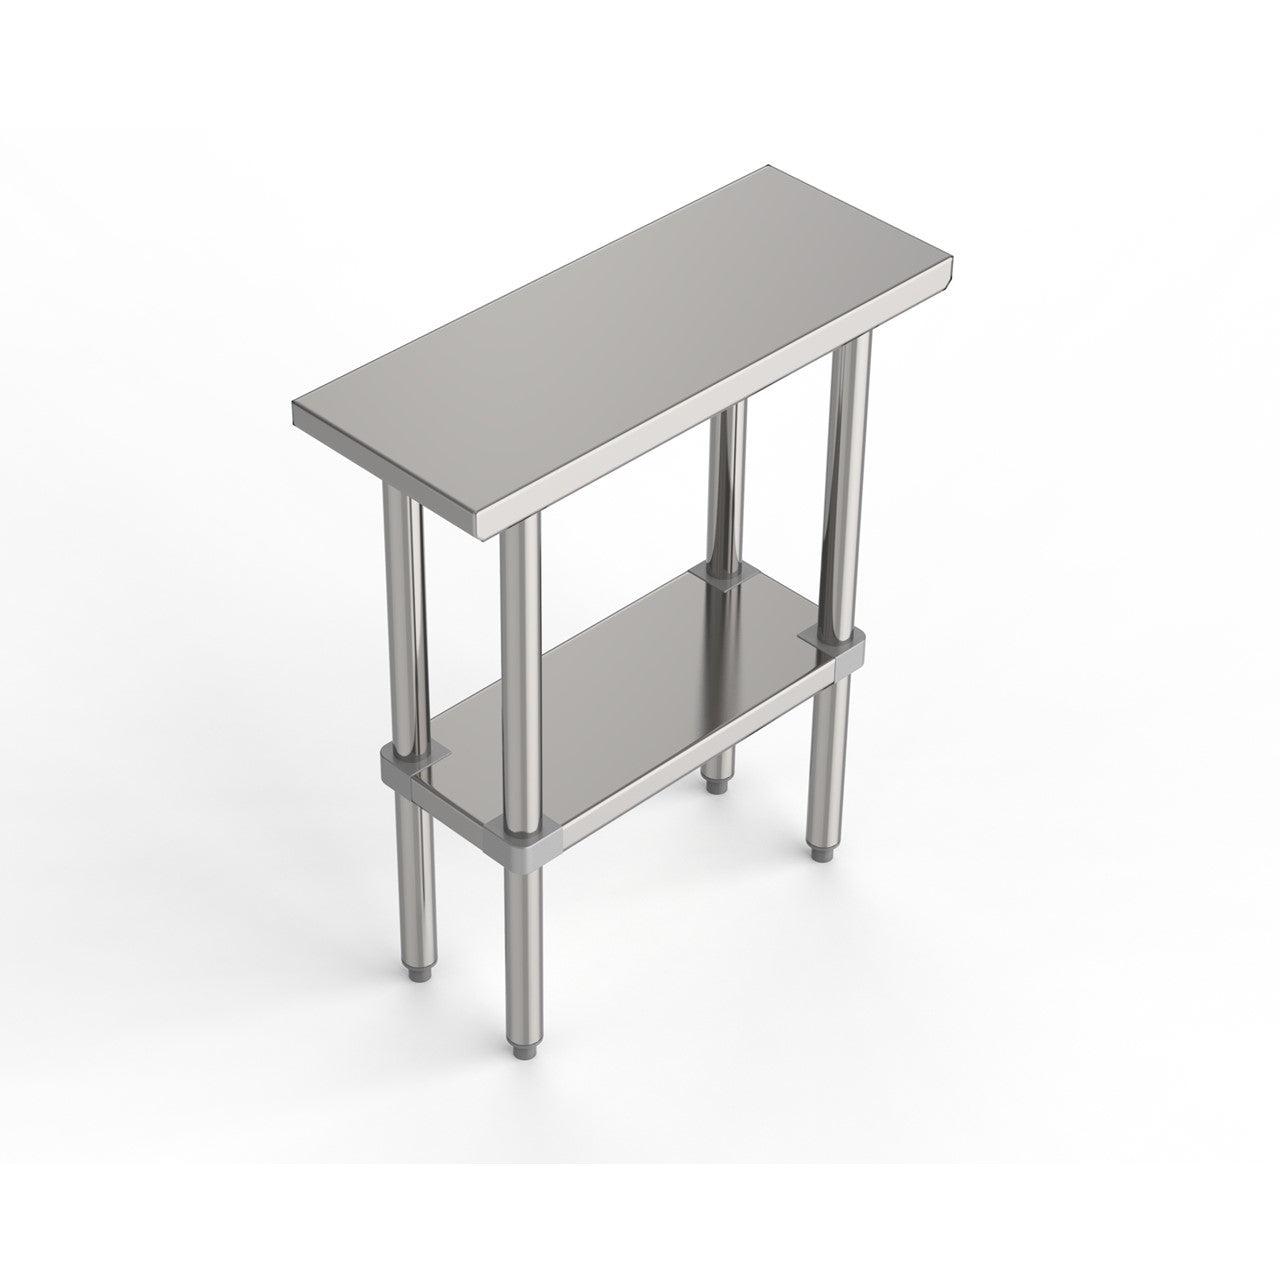 GSW Commercial Grade Flat Top Work Table with Stainless Steel Top, Galvanized Undershelf & Legs, Adjustable Bullet Feet, Perfect for Restaurant, Home, Office, Kitchen or Garage, NSF Approved (24"W x 12"L x 35"H)